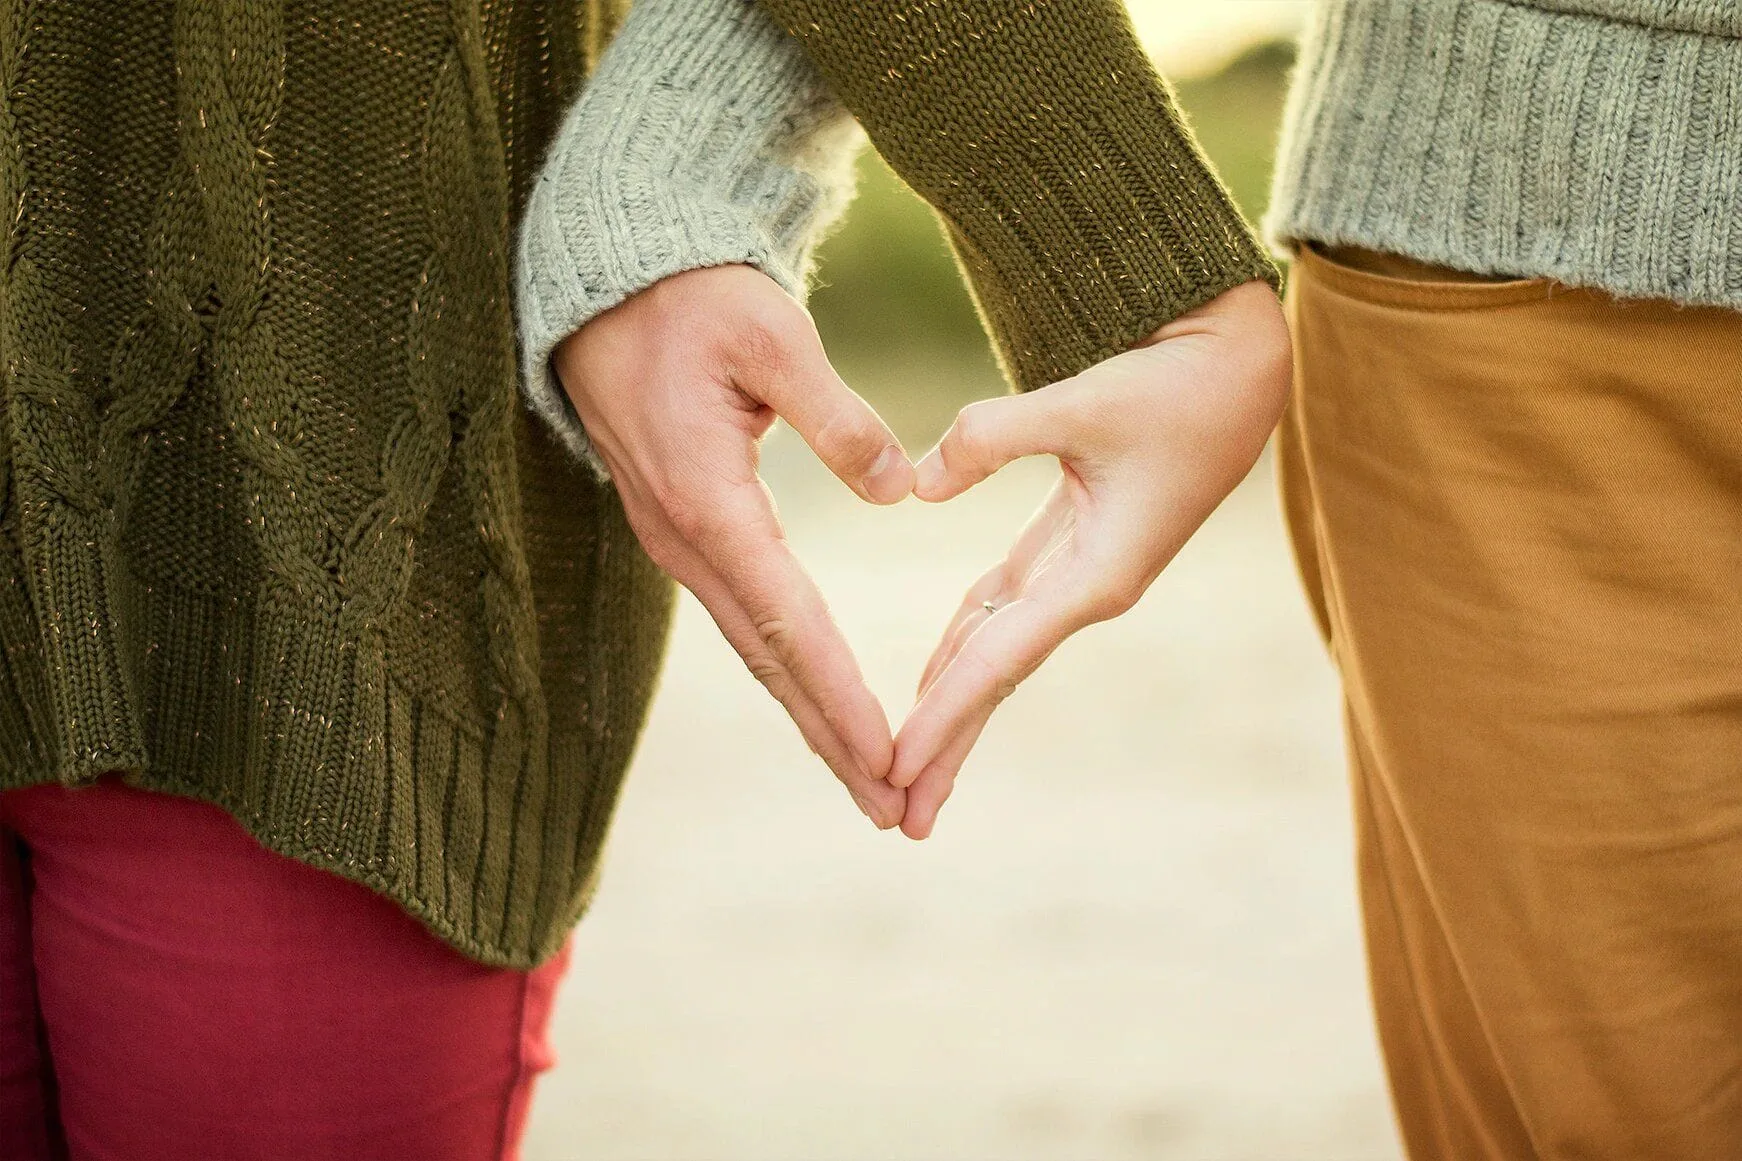 Two people with linked hands forming a heart